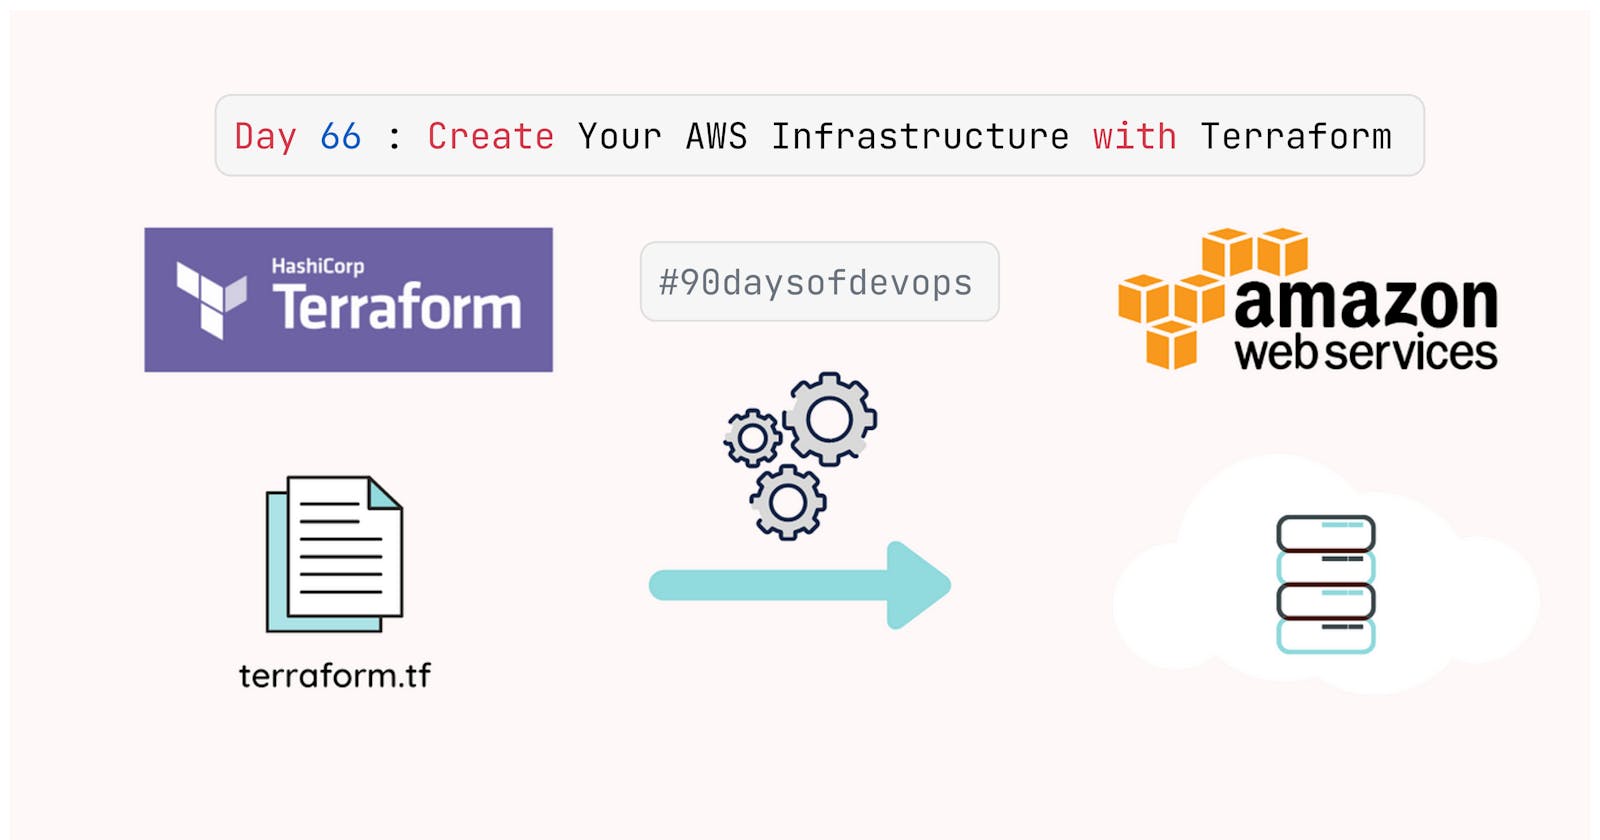 Day 66 : Create Your AWS Infrastructure with Infrastructure as Code (IaC)